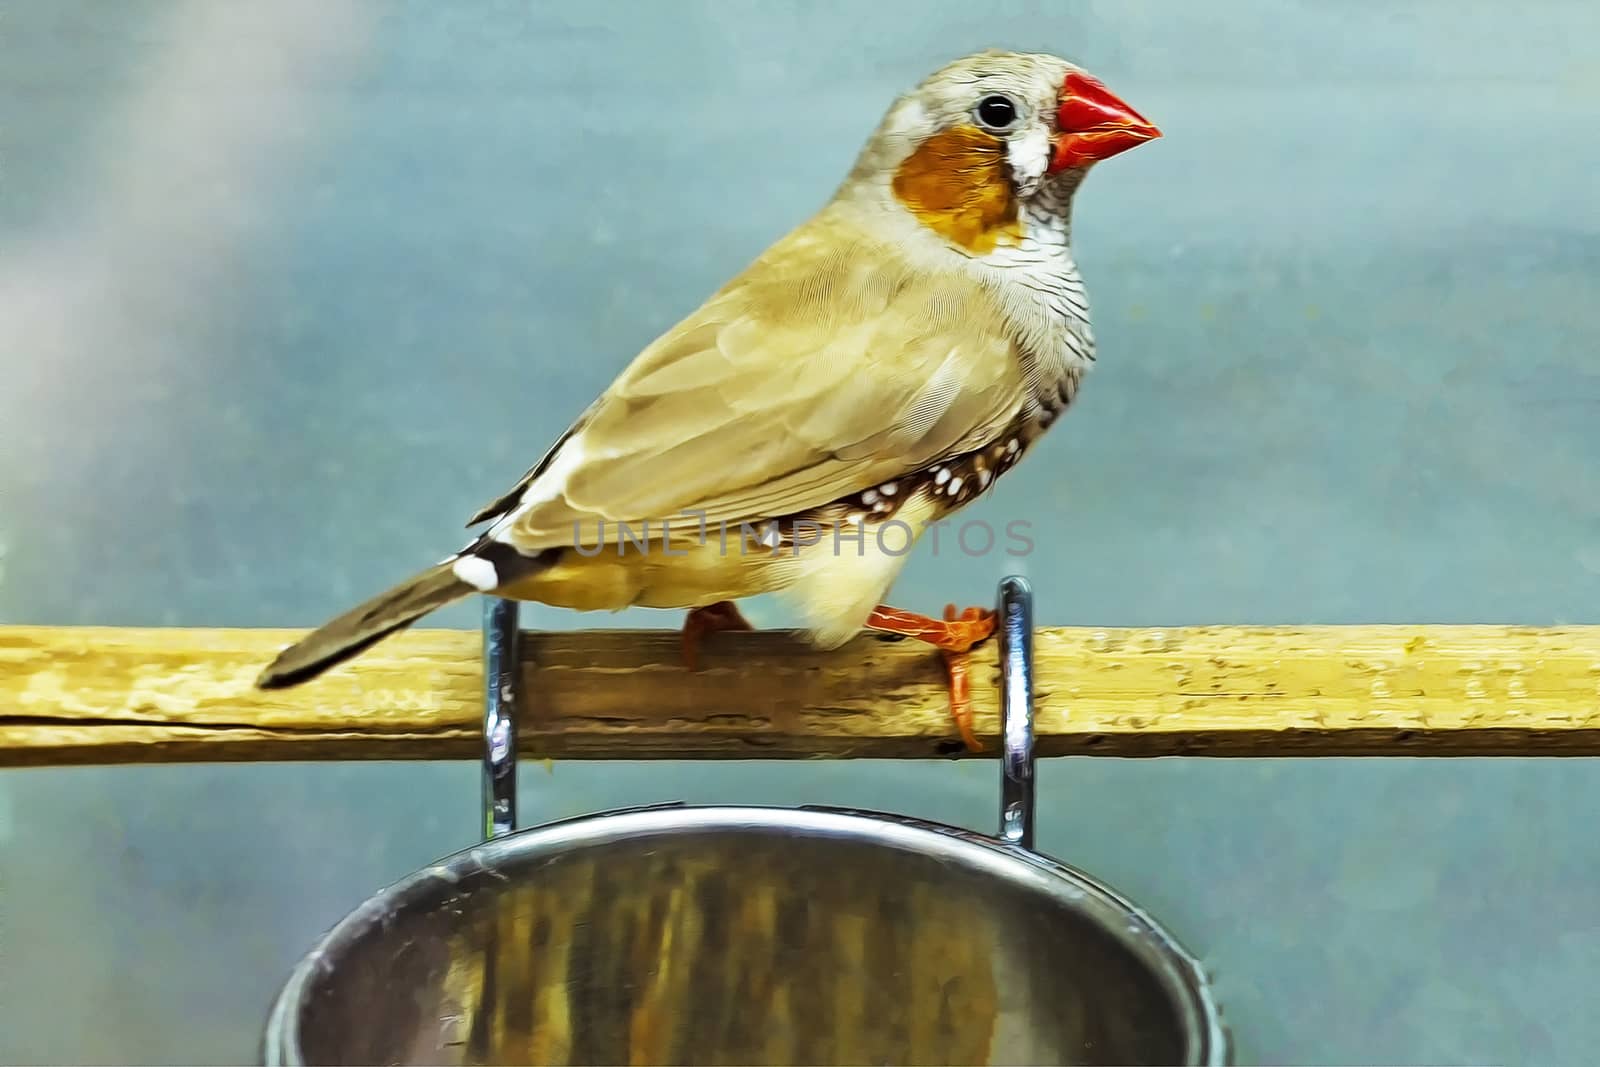 Light-colored canary. Front view and Nature.